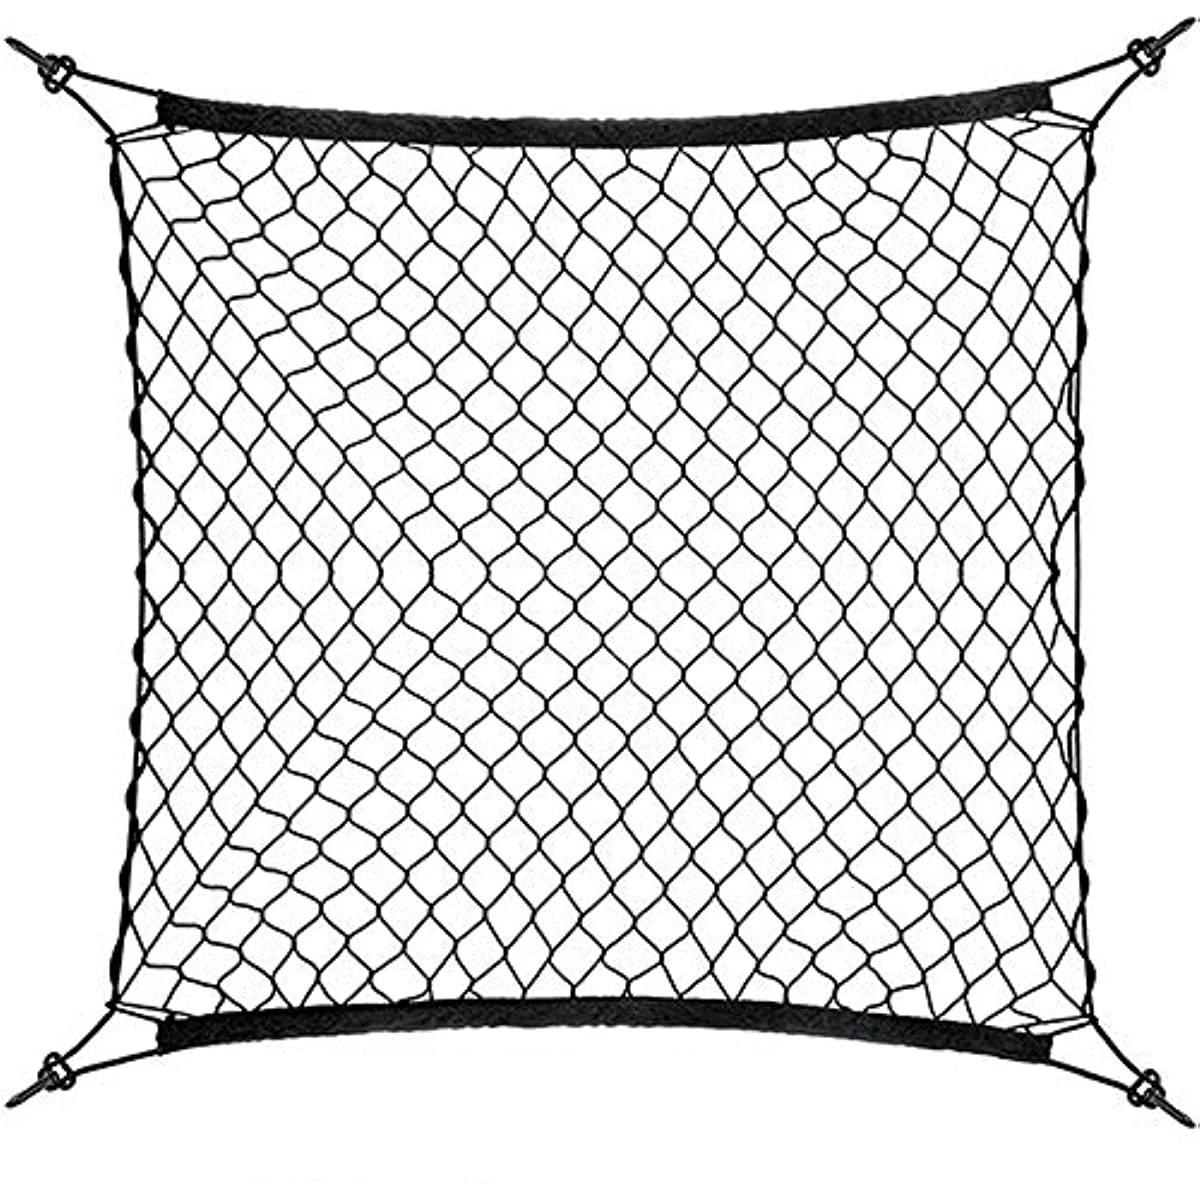 4 HooK Car Trunk Cargo Mesh Net Luggage For Volvo S40 S60 S70 S80 S90 V4... - £11.46 GBP